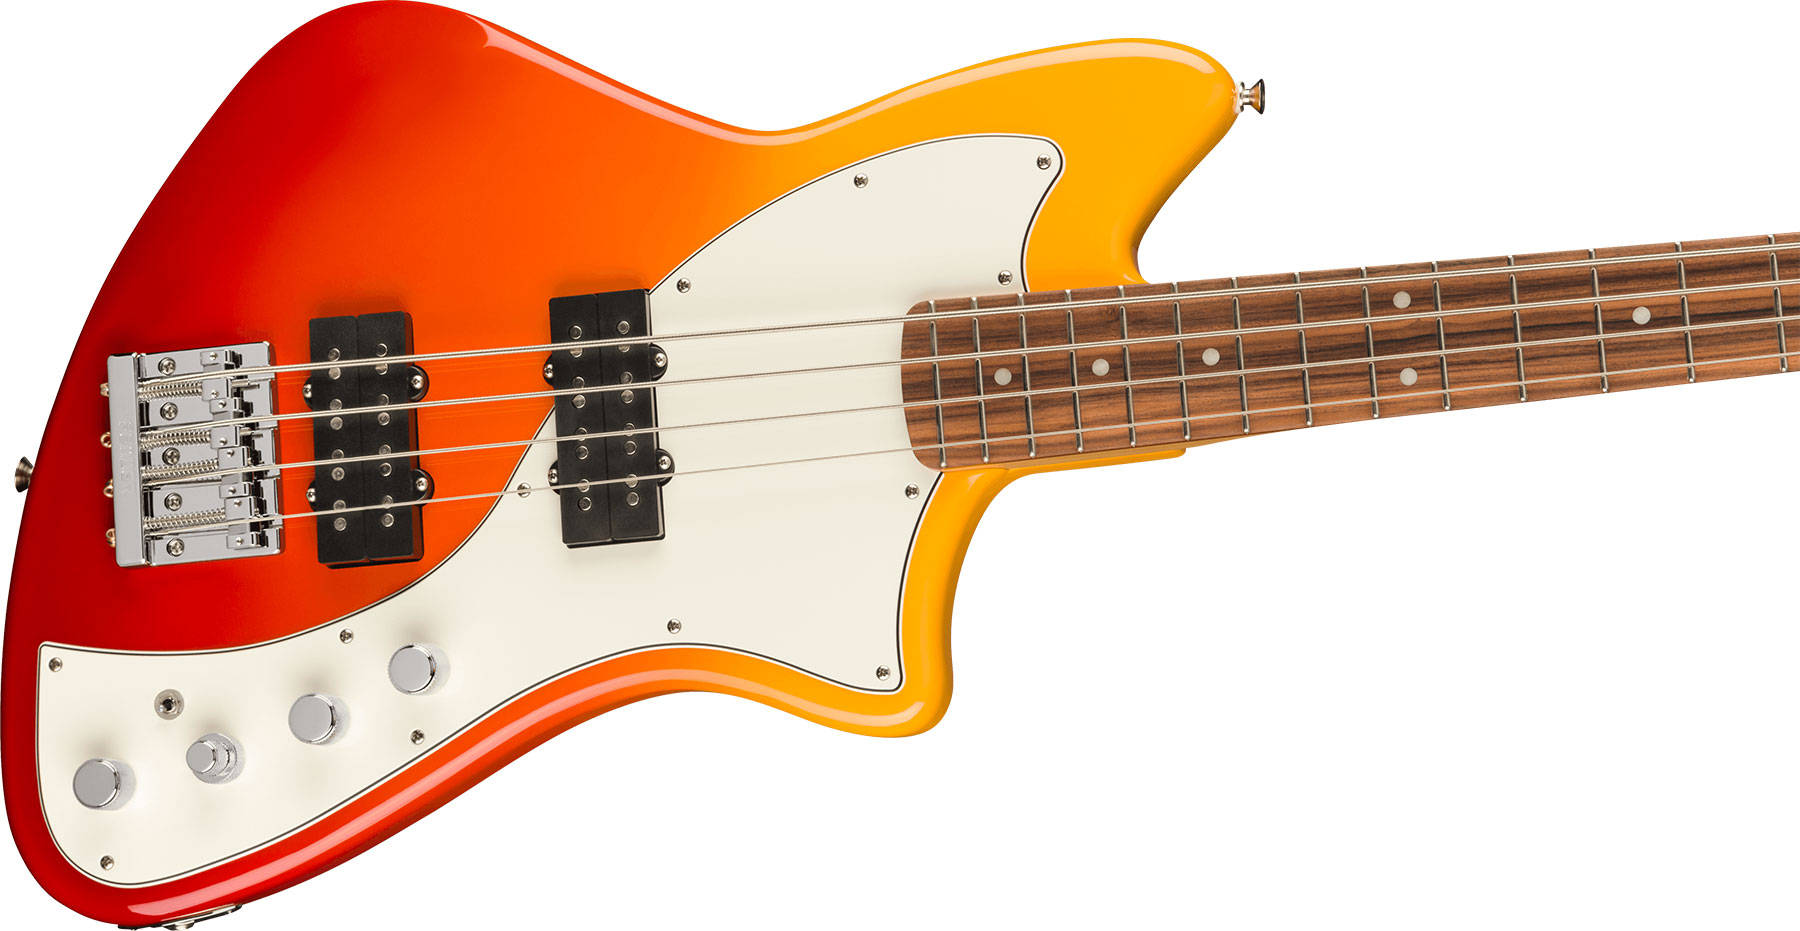 Fender Meteora Bass Active Player Plus Mex Pf - Tequila Sunrise - Solidbody E-bass - Variation 2